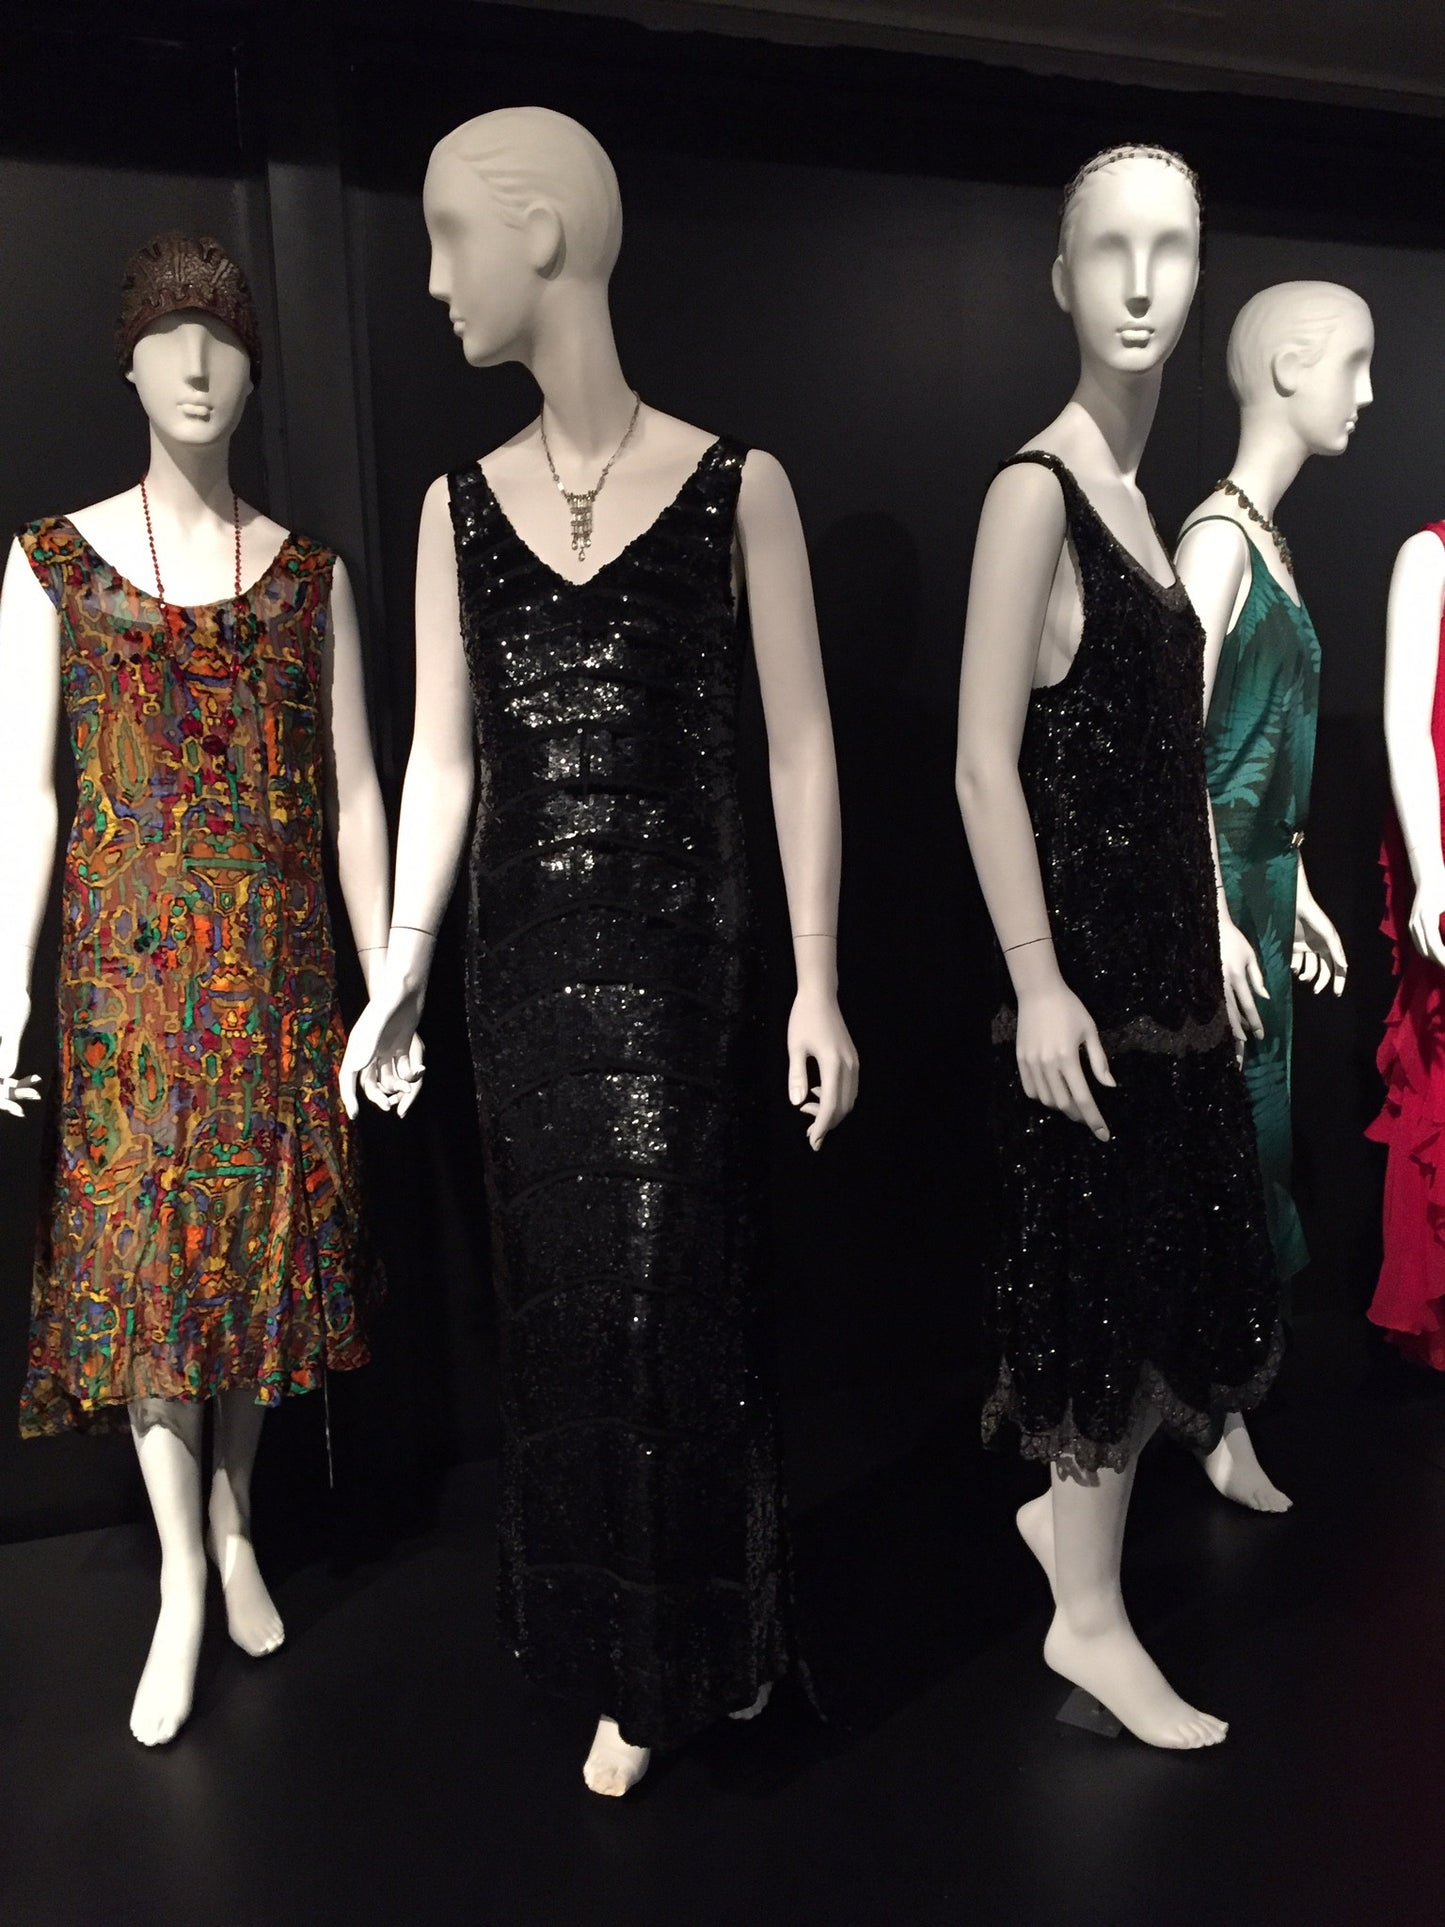 Decadence: Fashion From The 1920's